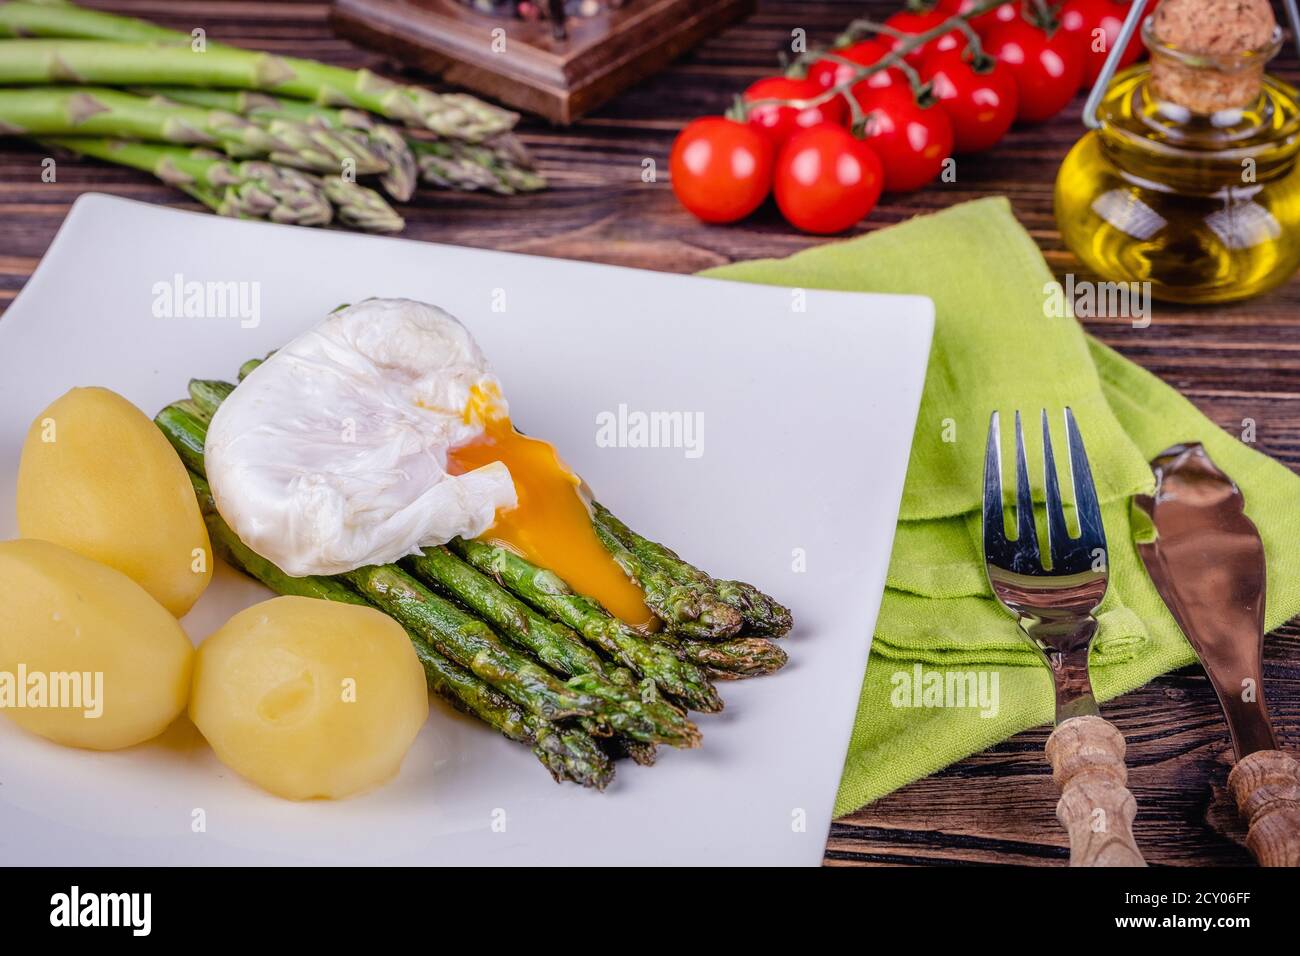 Green asparagus and boiled poached egg on a white plate. Stock Photo